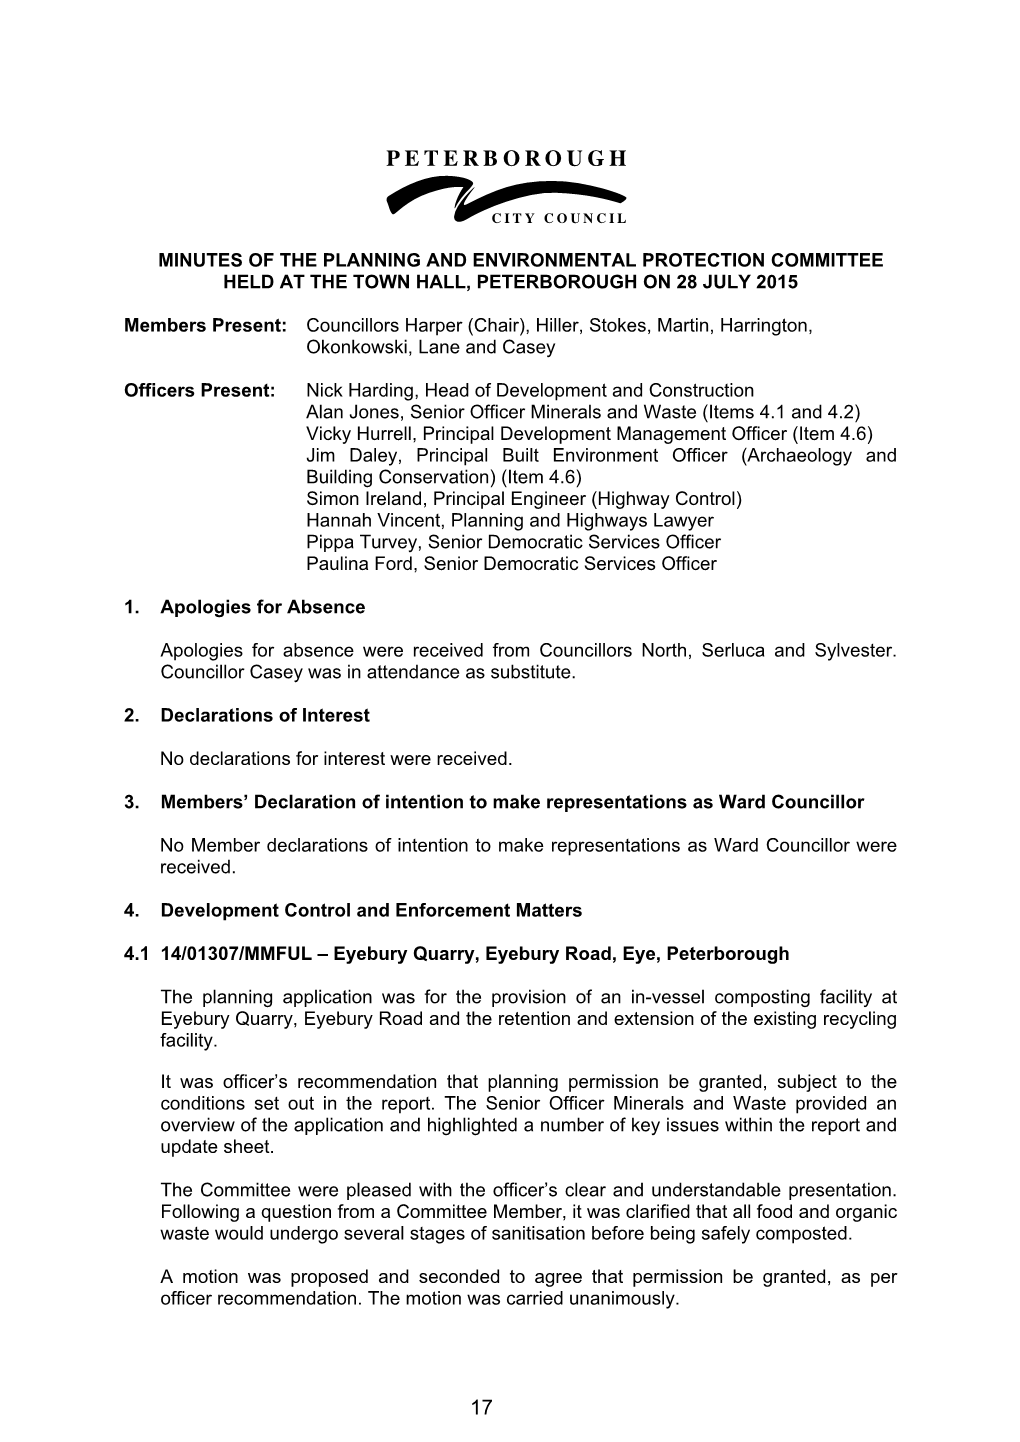 Minutes of the Planning and Environmental Protection Committee Held at the Town Hall, Peterborough on 28 July 2015